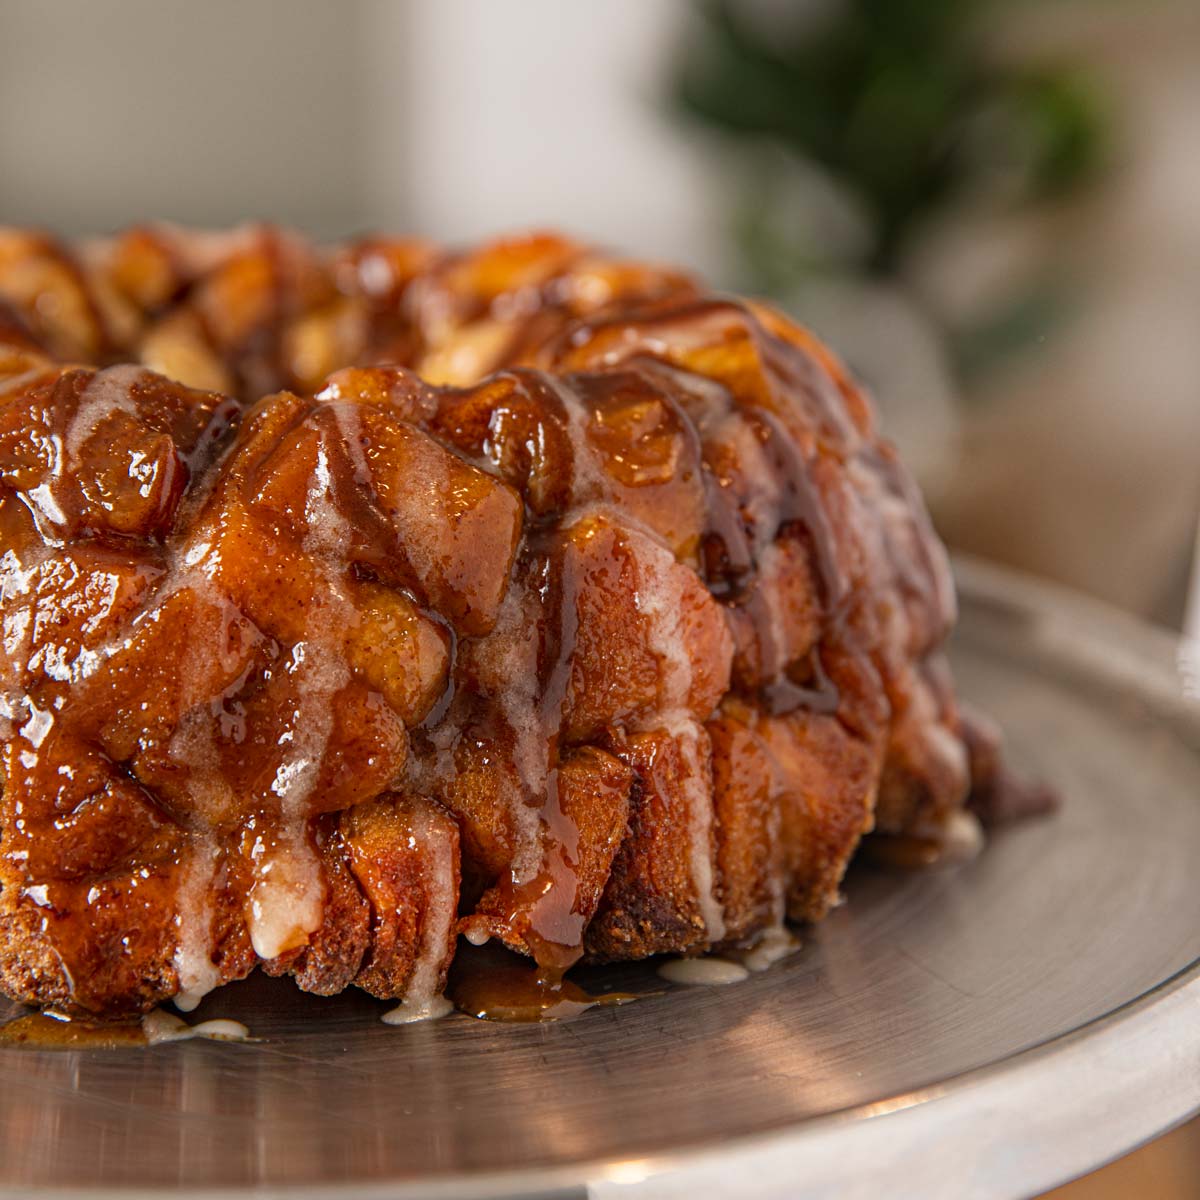 How To Store Monkey Bread